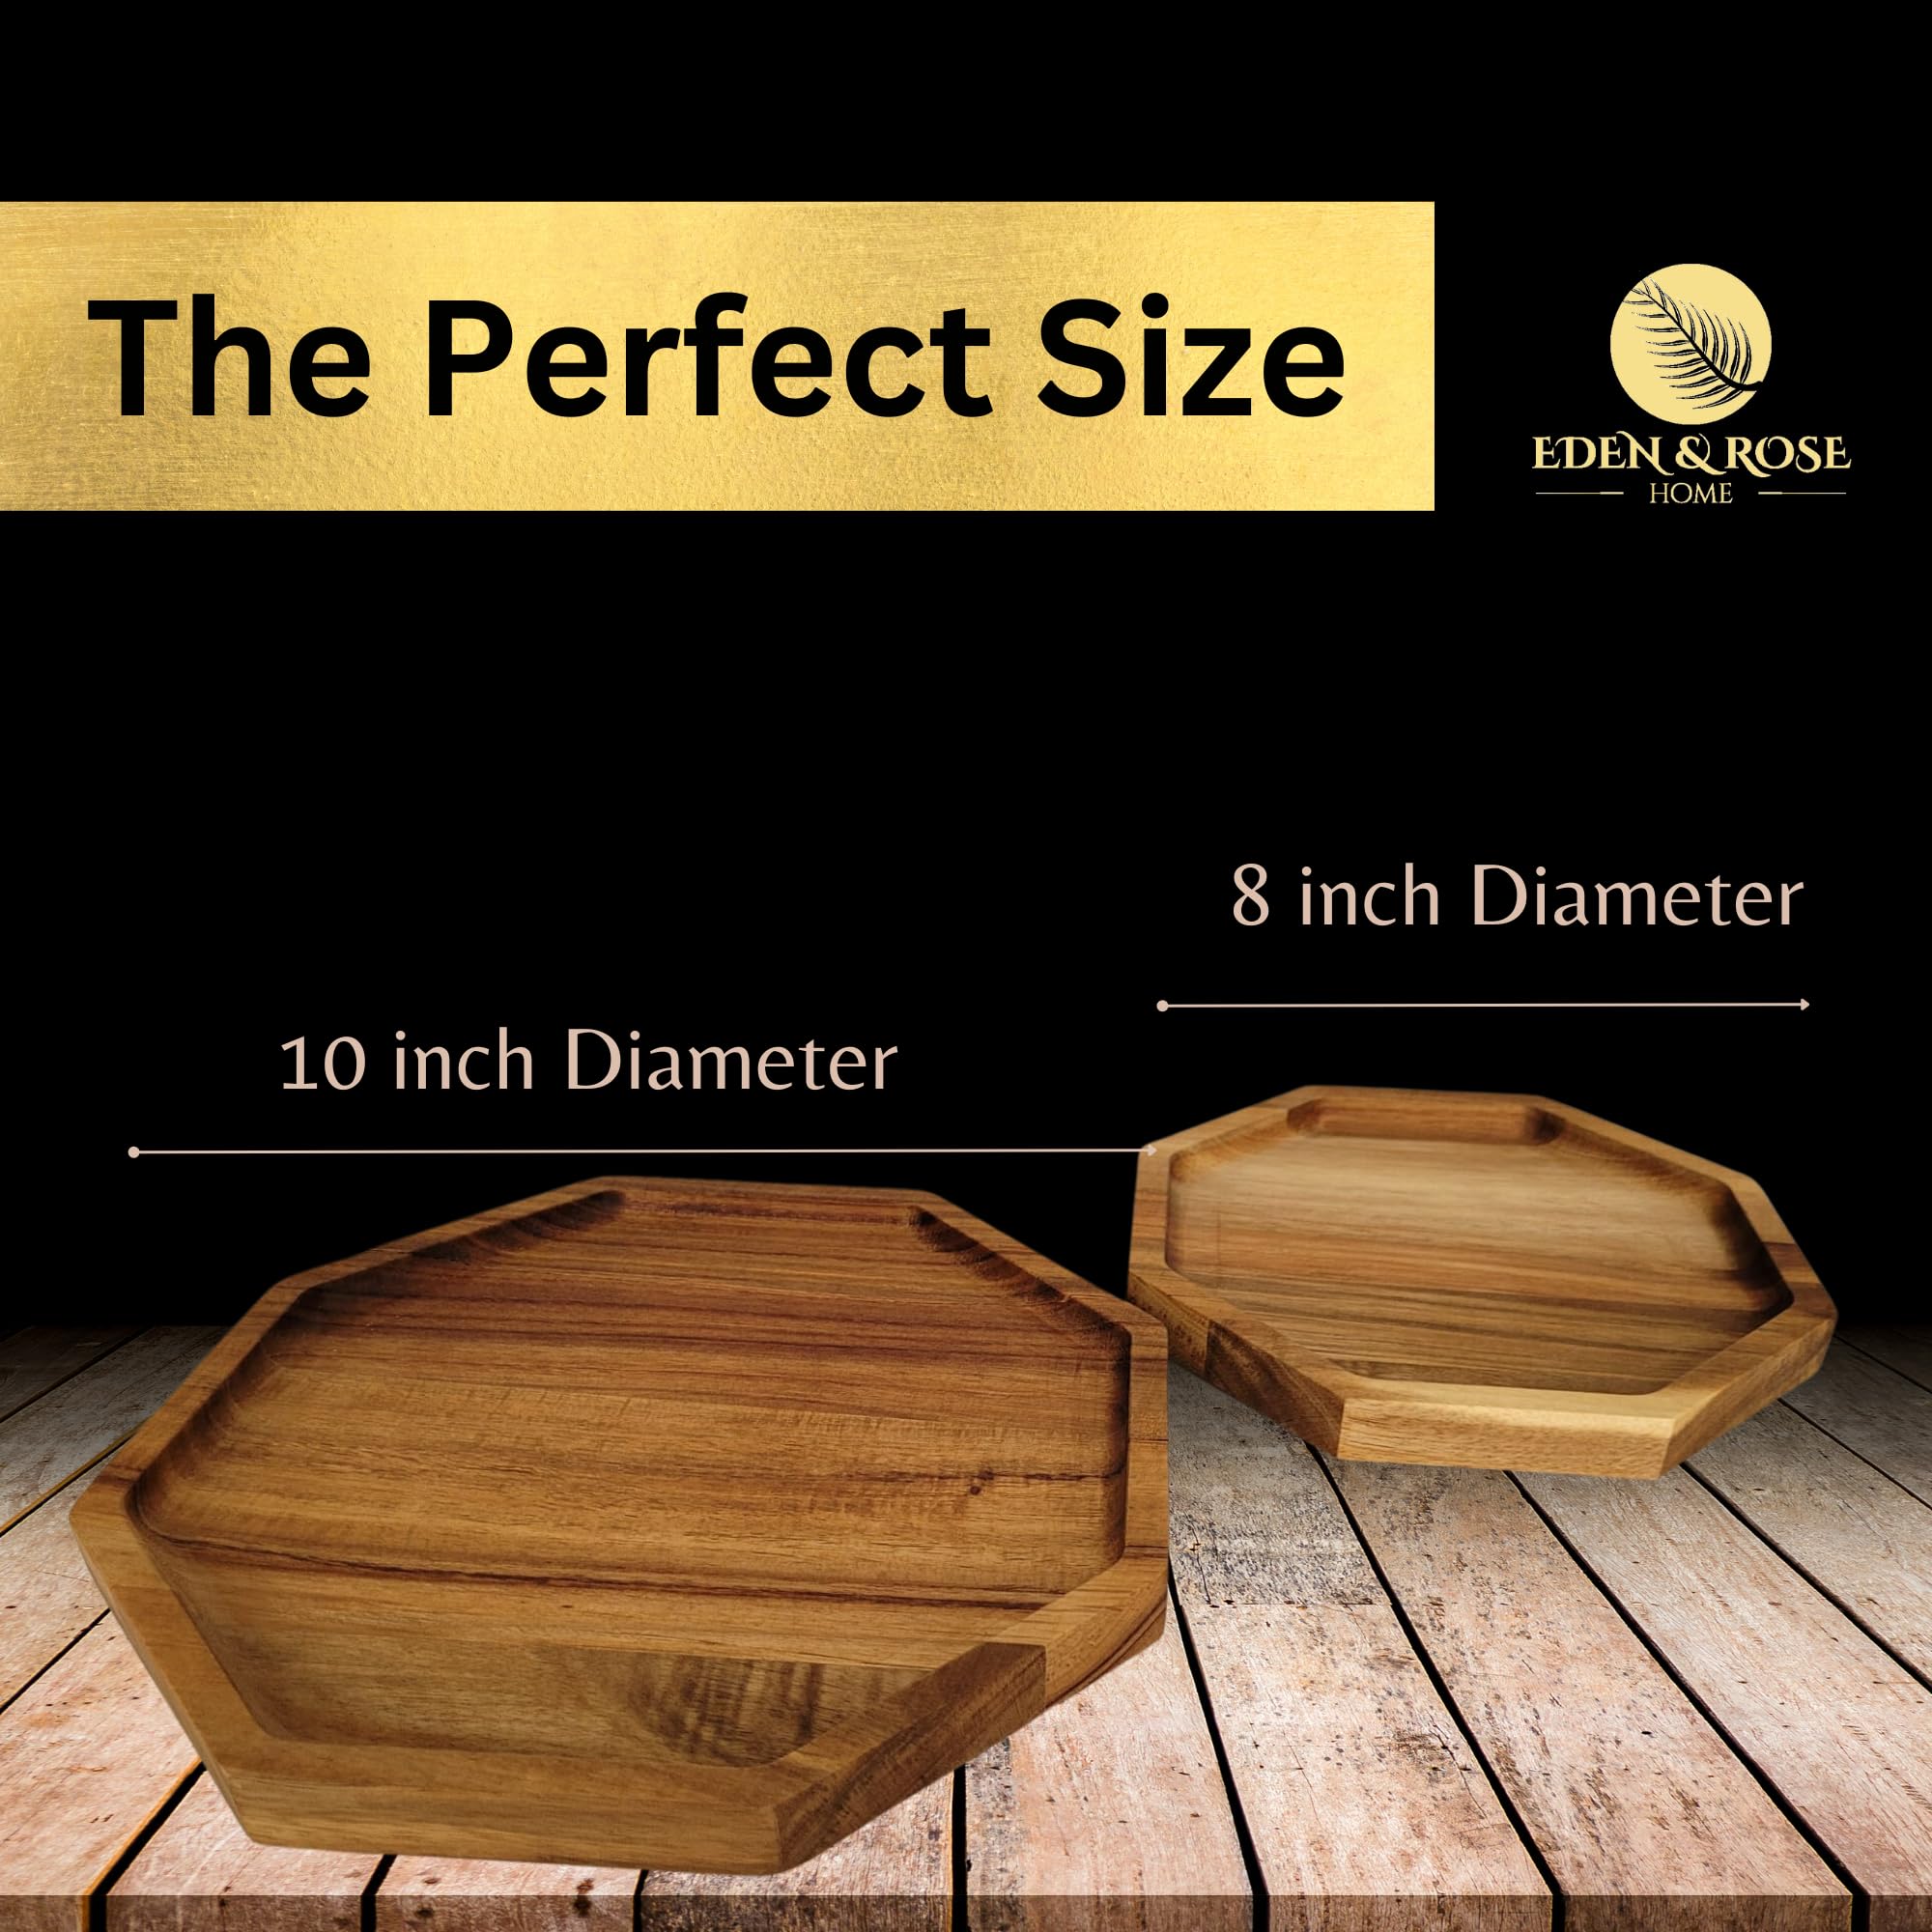 Charcuterie Boards, Coffee Table Tray, Cheese Board, Octagonal Serving Platter, Acacia Wood Decorative Tray, Vanity Tray, Ottoman Tray, New Home Gift, Set of 2 Serving Dishes for Entertaining